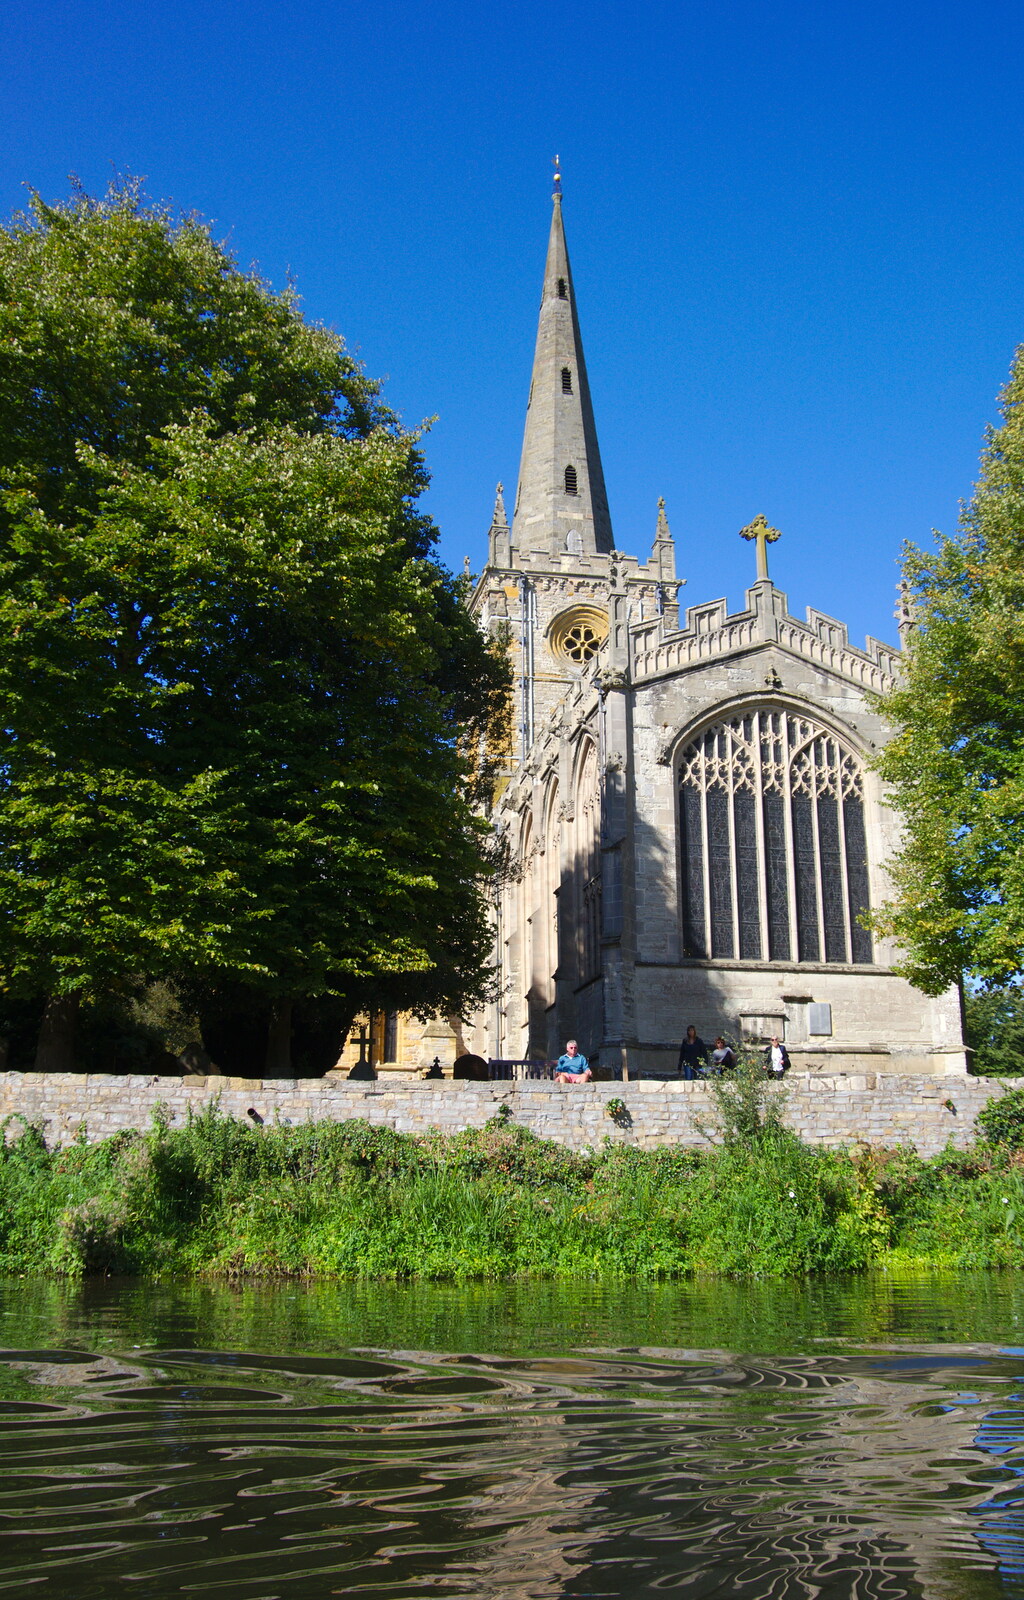 Holy Trinity Church from the river from A Boat Trip on the River, Stratford upon Avon, Warwickshire - 14th September 2019